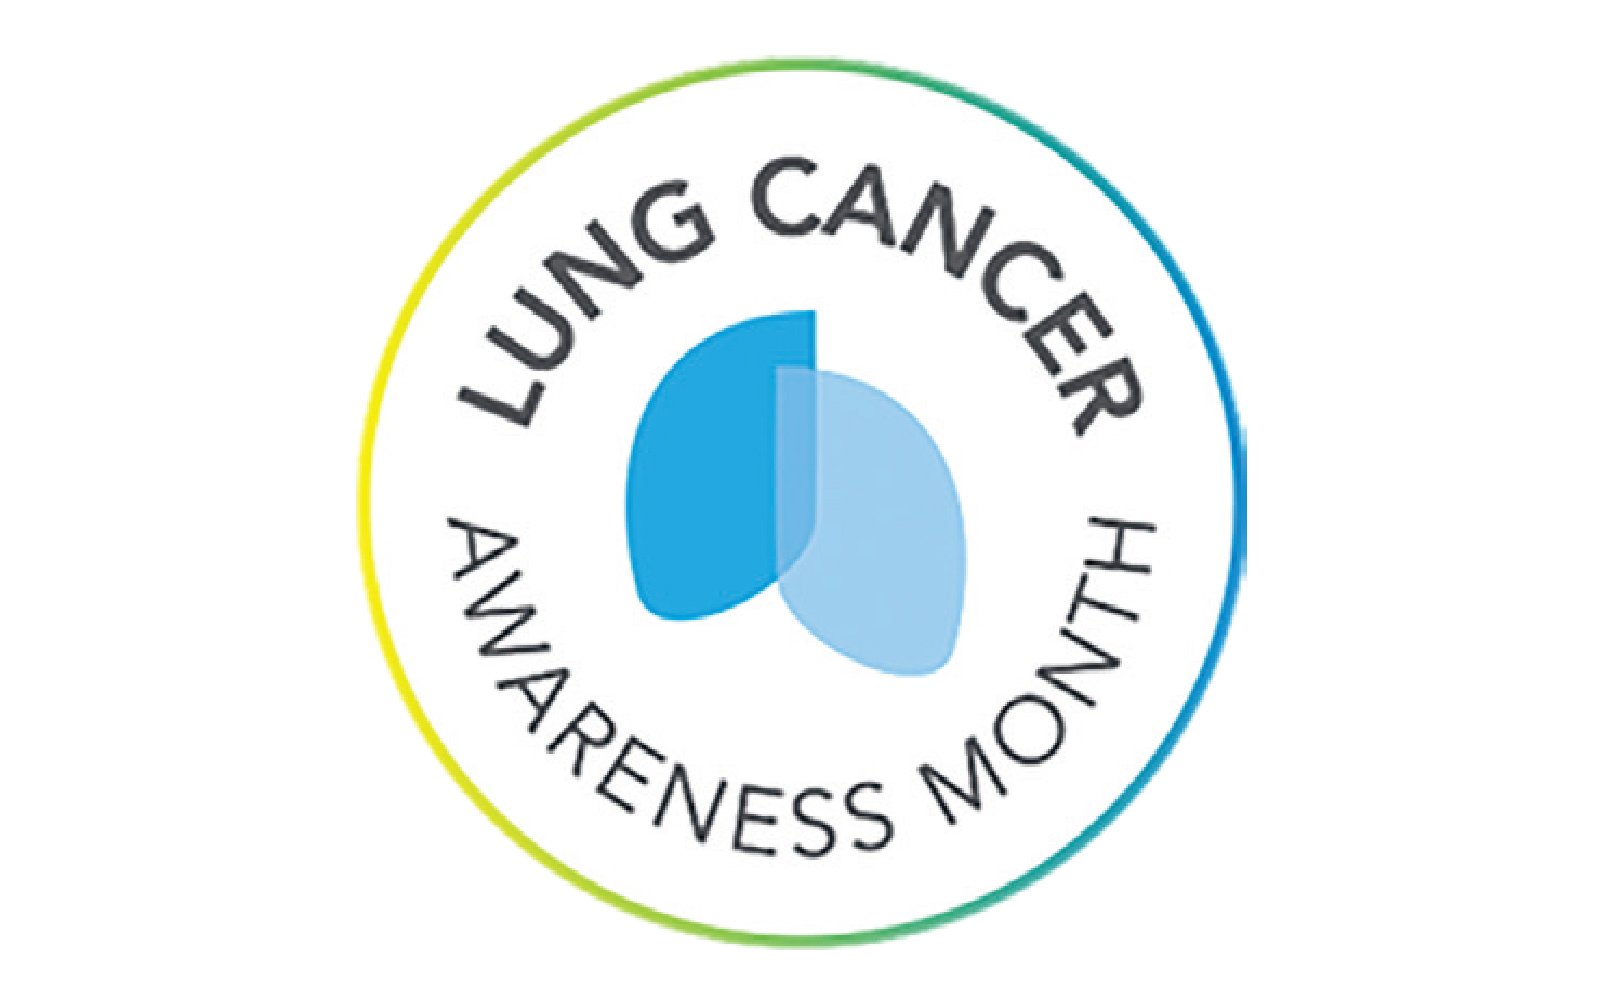 Second Annual Lung Cancer Awareness Month to Publicize Research Advances and Hope